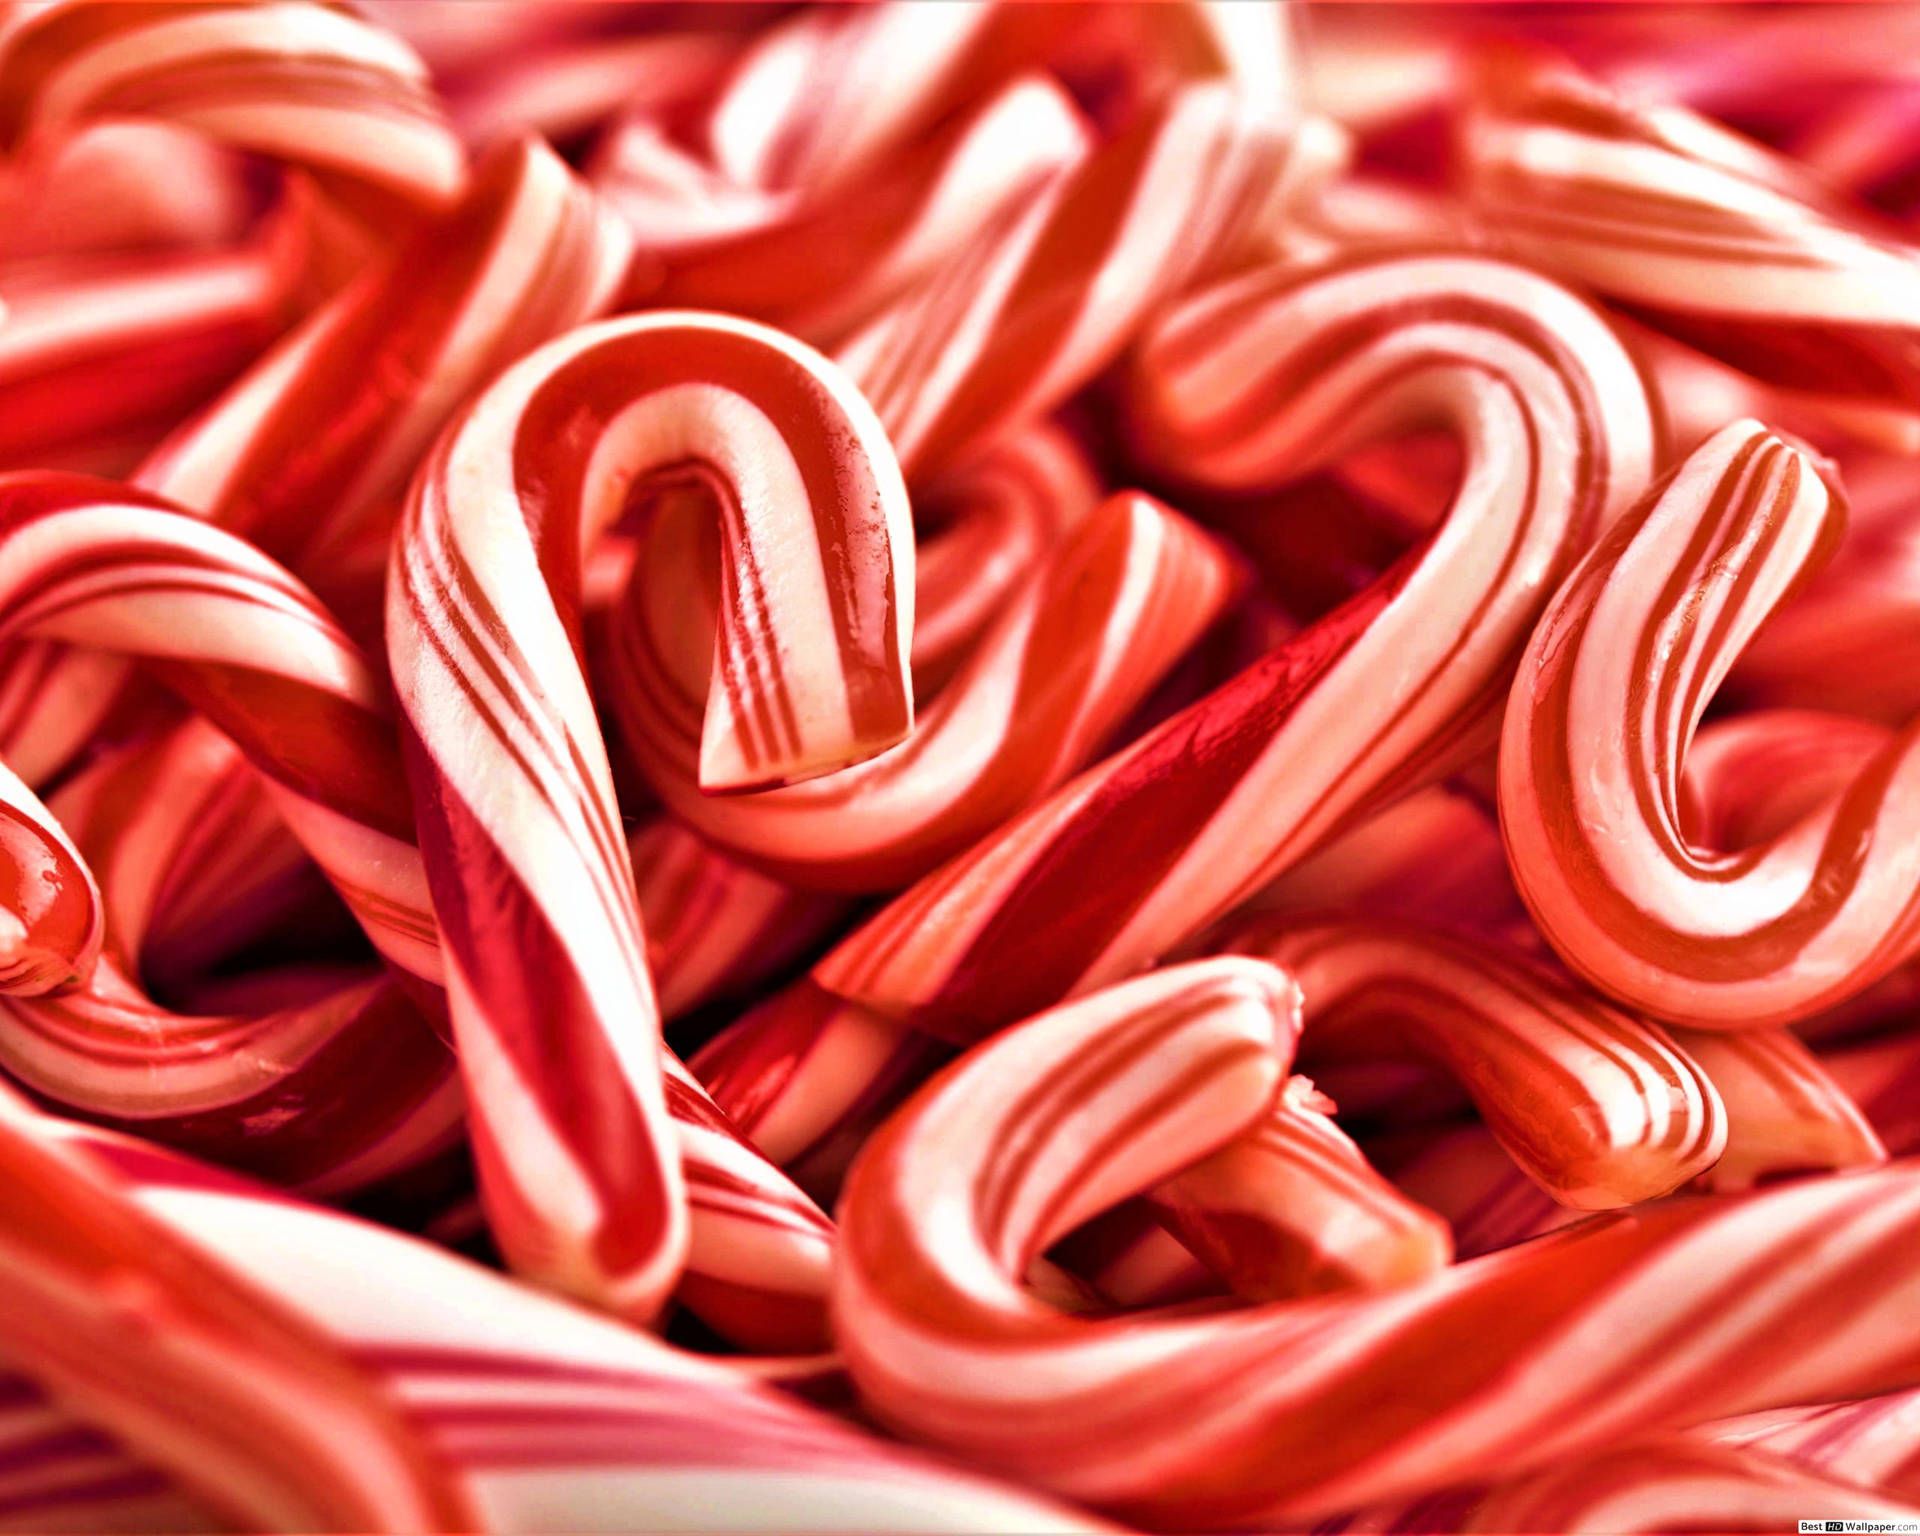 A pile of red and white candy canes - Candy cane